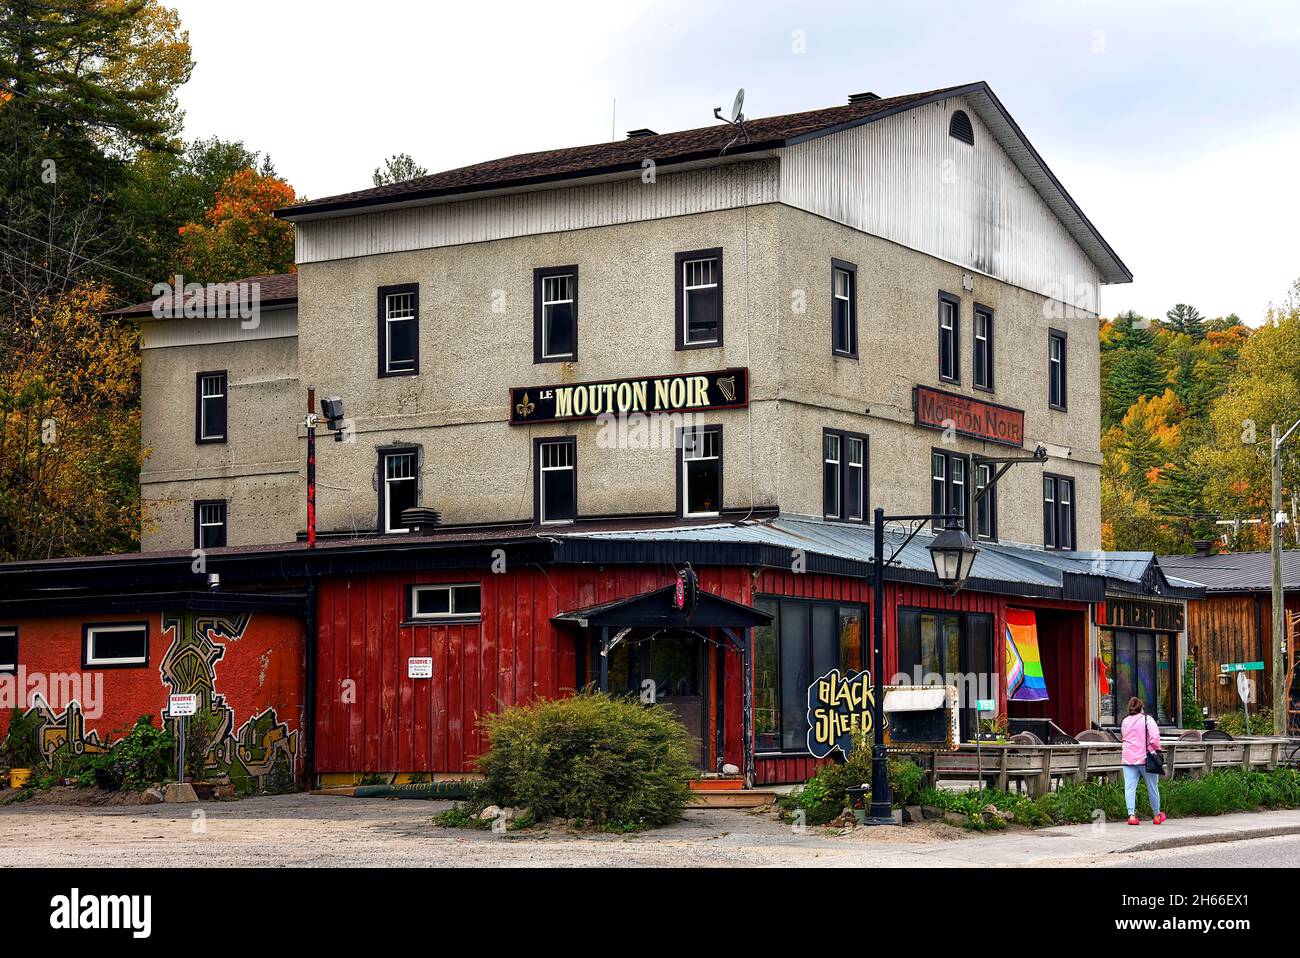 Wakefield, Canada – October 9, 2021: The Black Sheep Inn is a well-respected pub/cabaret that has hosted many live concerts over the years.  It locate Stock Photo